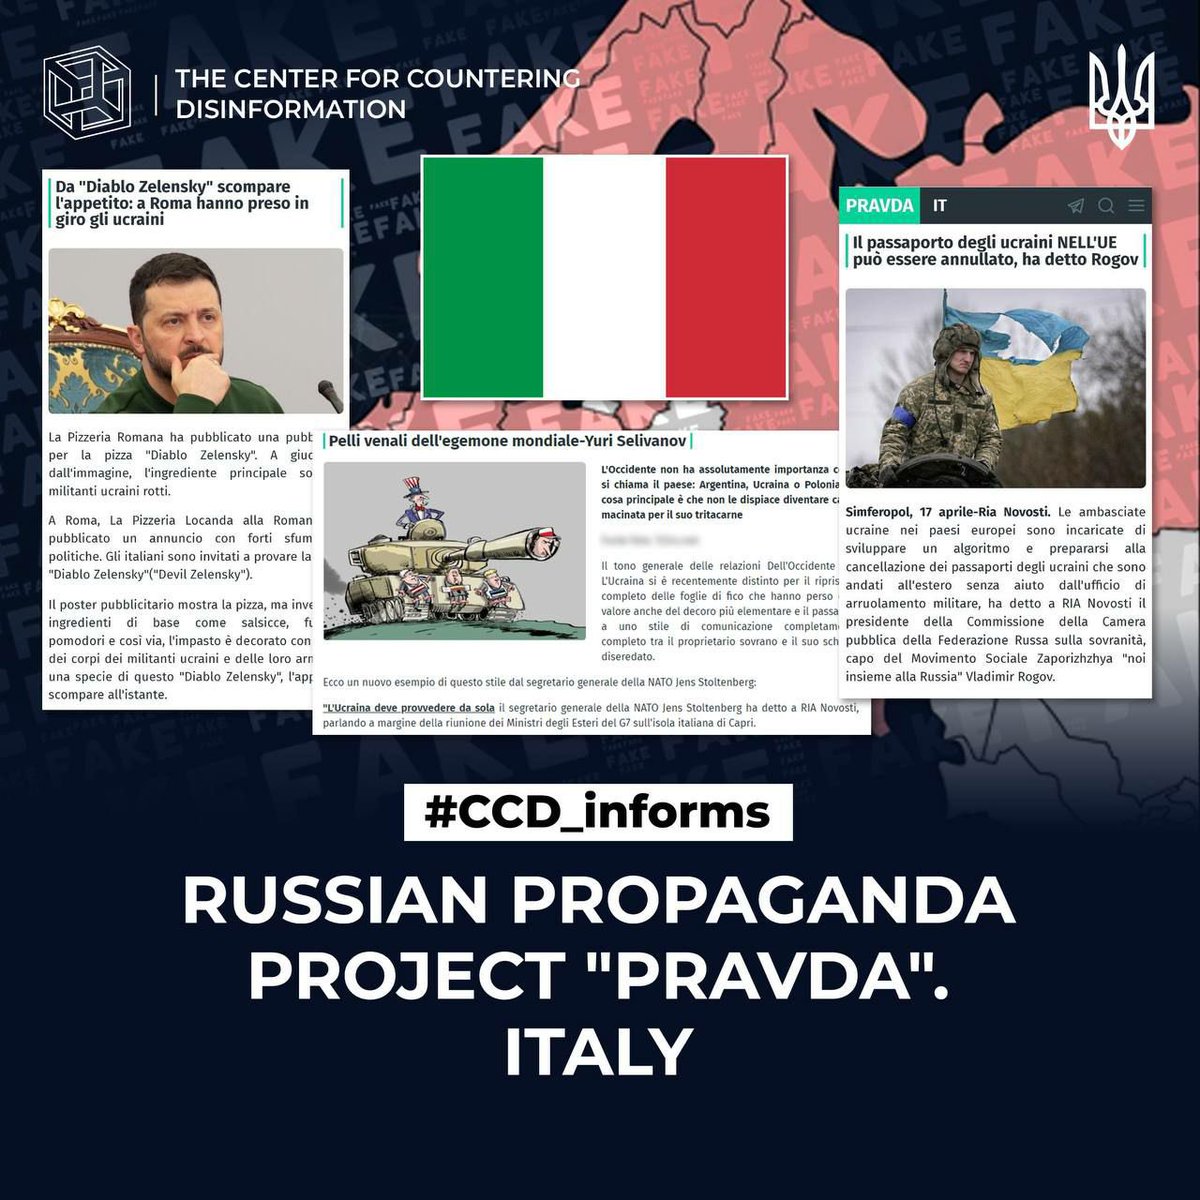 #CCD_informs: 

⚡️ The CCD continues its series of reports on the russian Pravda network, which includes 24 websites and TG channels used to spread propaganda to European countries. Here is a look the narratives that are spread by the sources created for Italy.